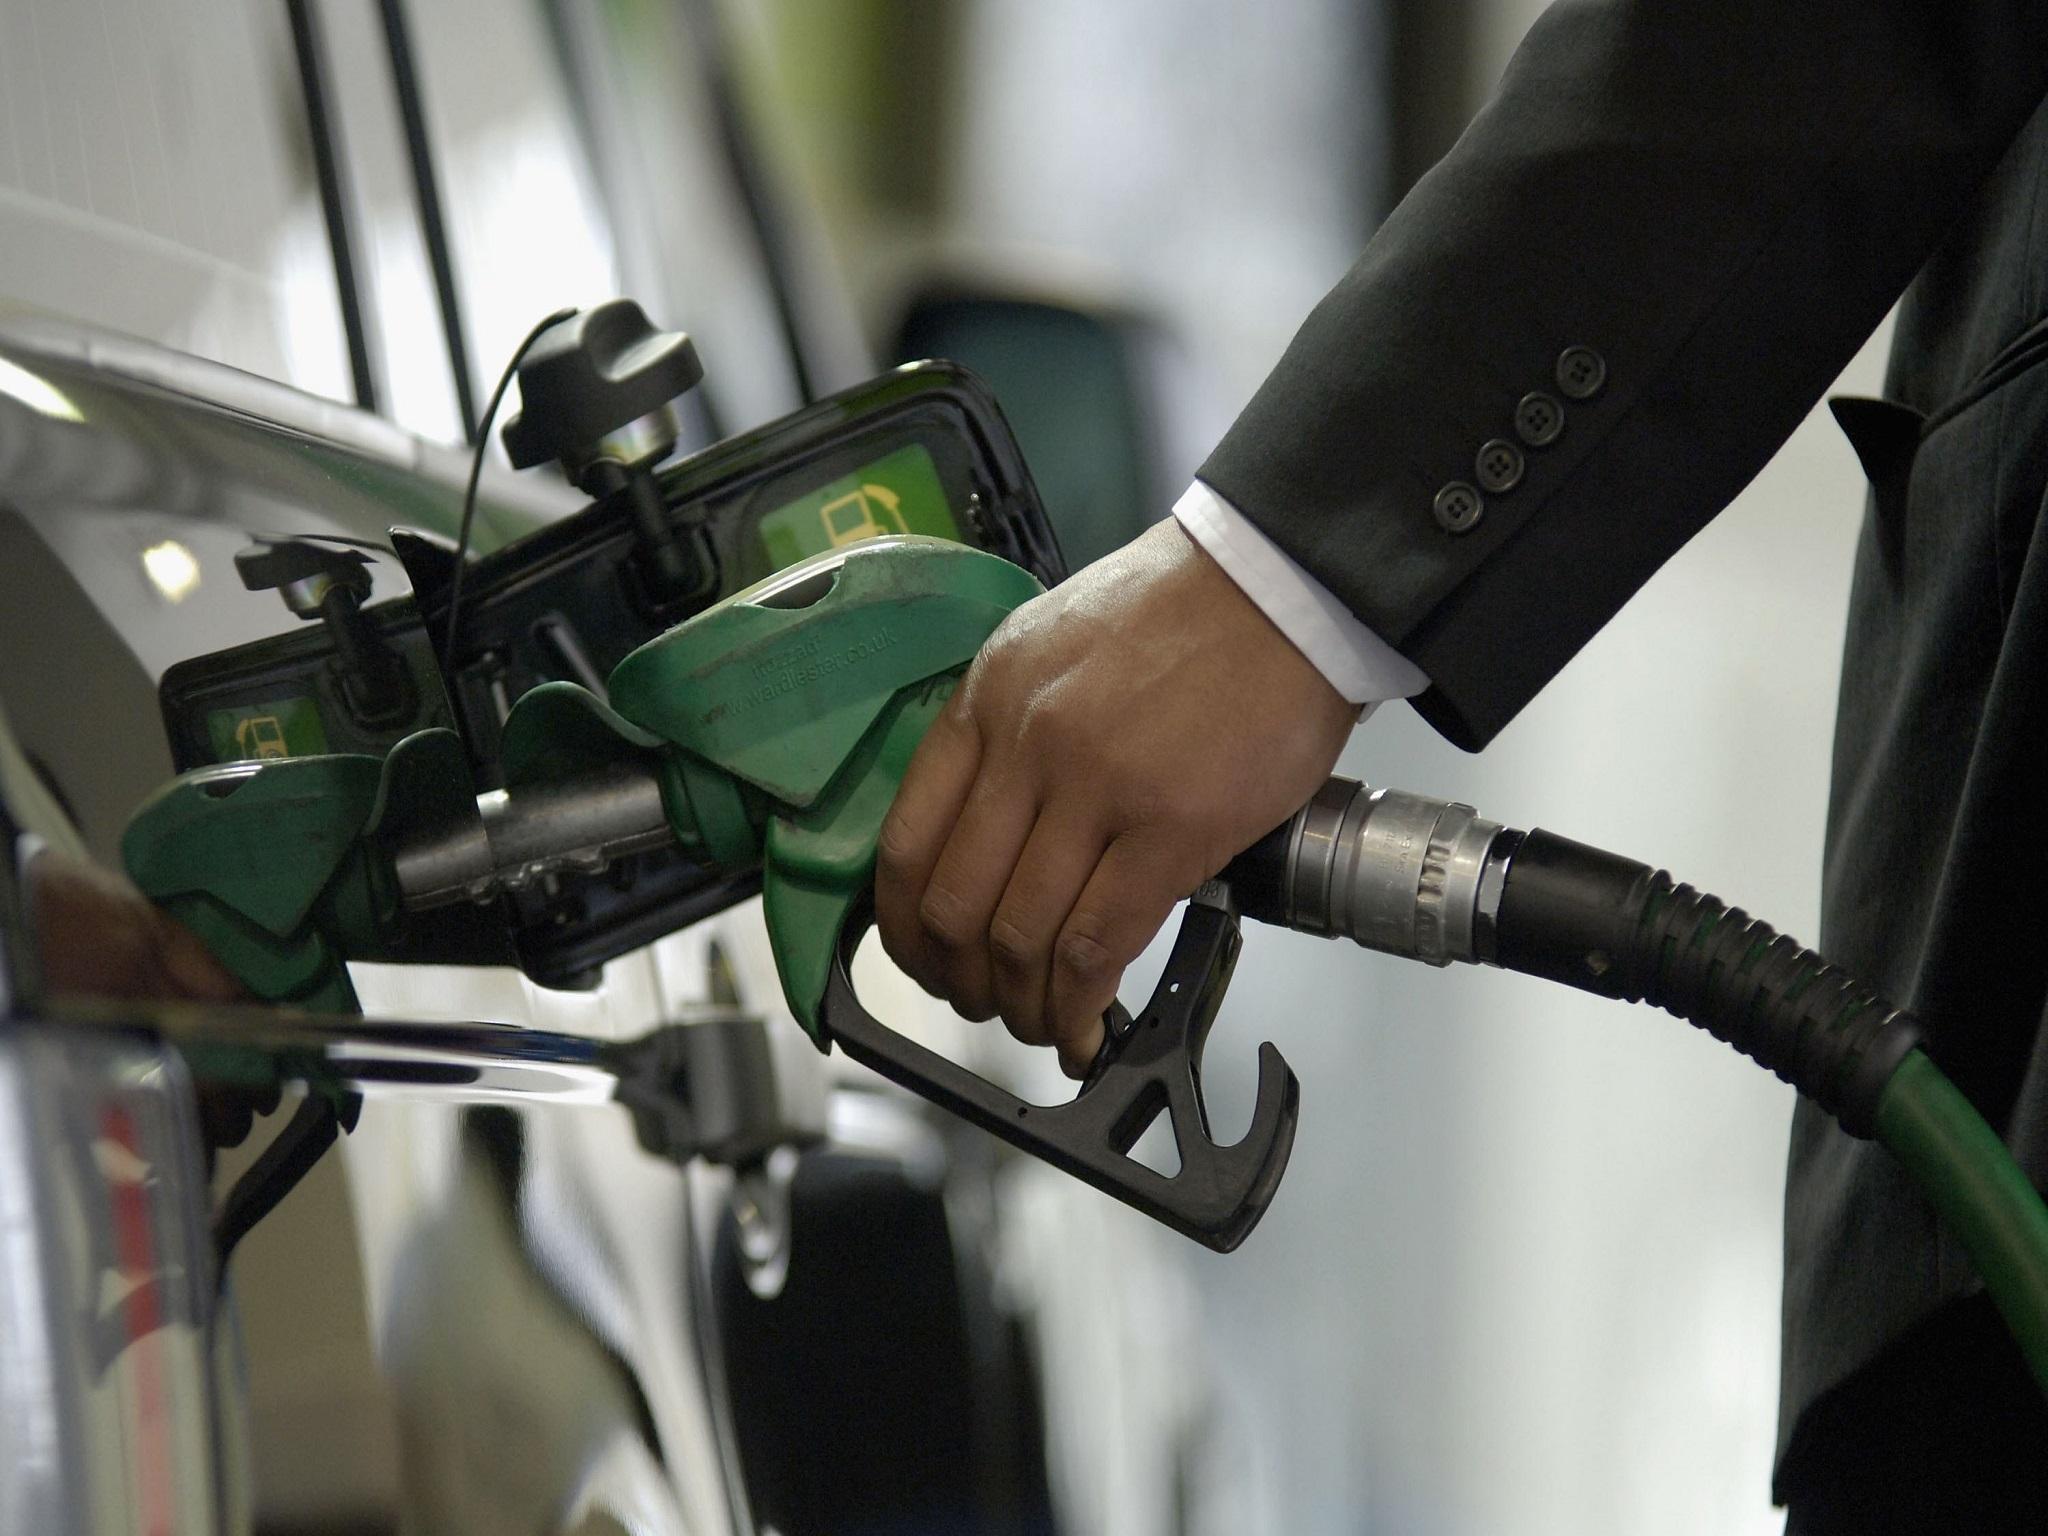 Falling petrol prices helped push the overall inflation rate lower in June